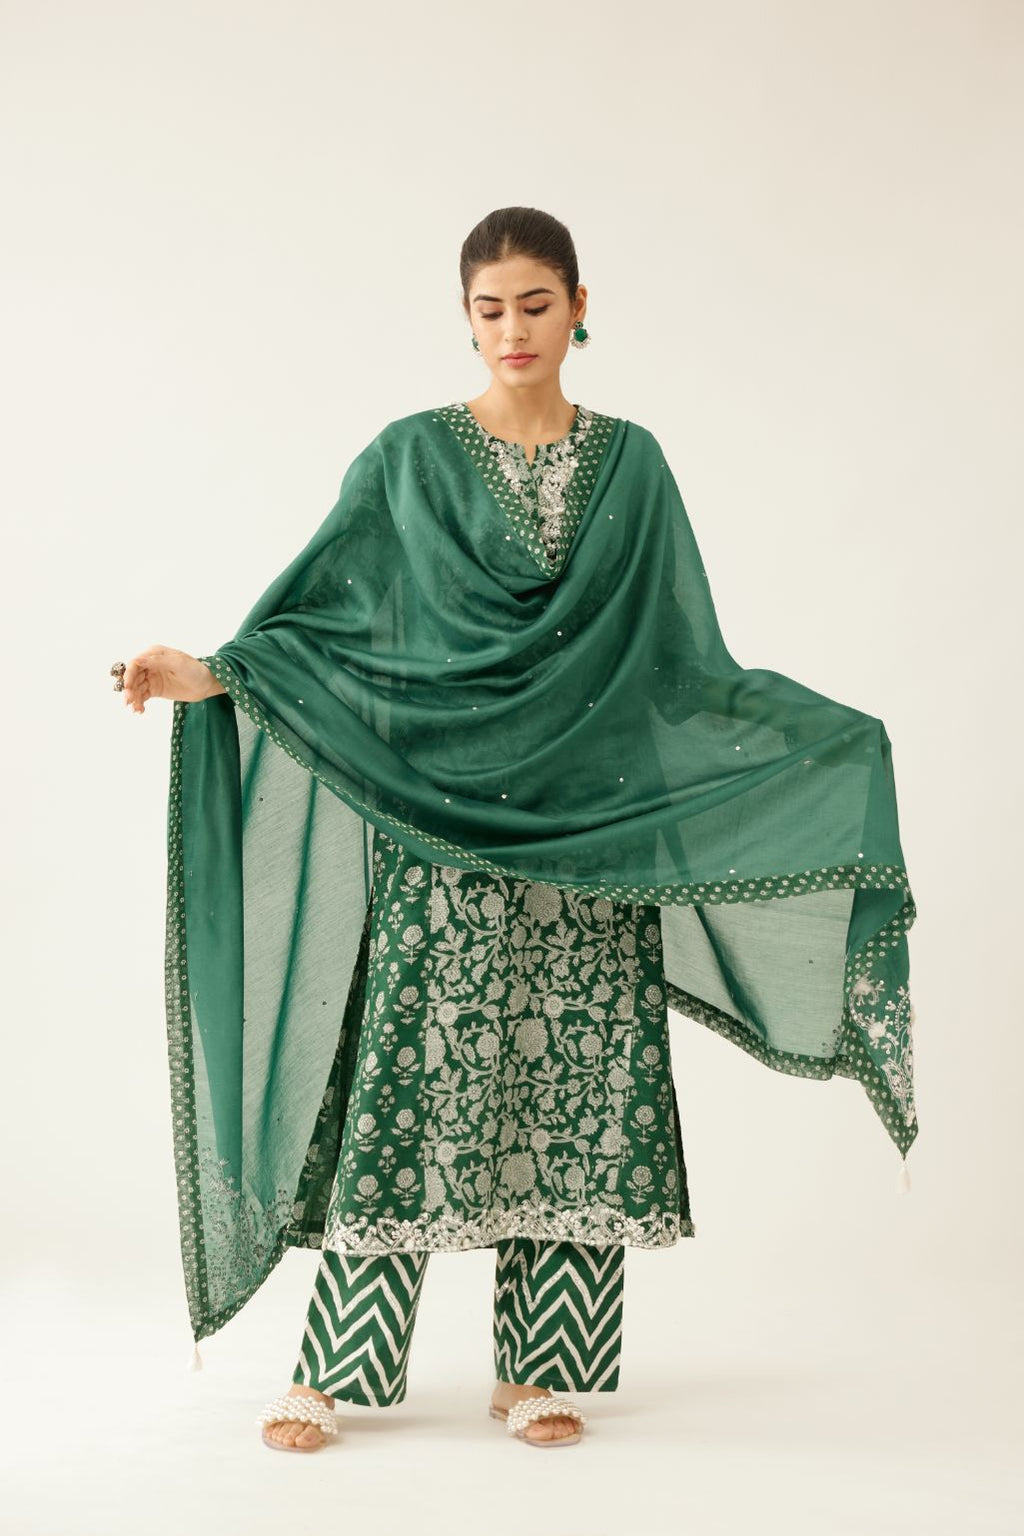 Green silk chanderi dupatta highlighted with sequin, tassels and bead work boota at corners and printed border running along all edges.